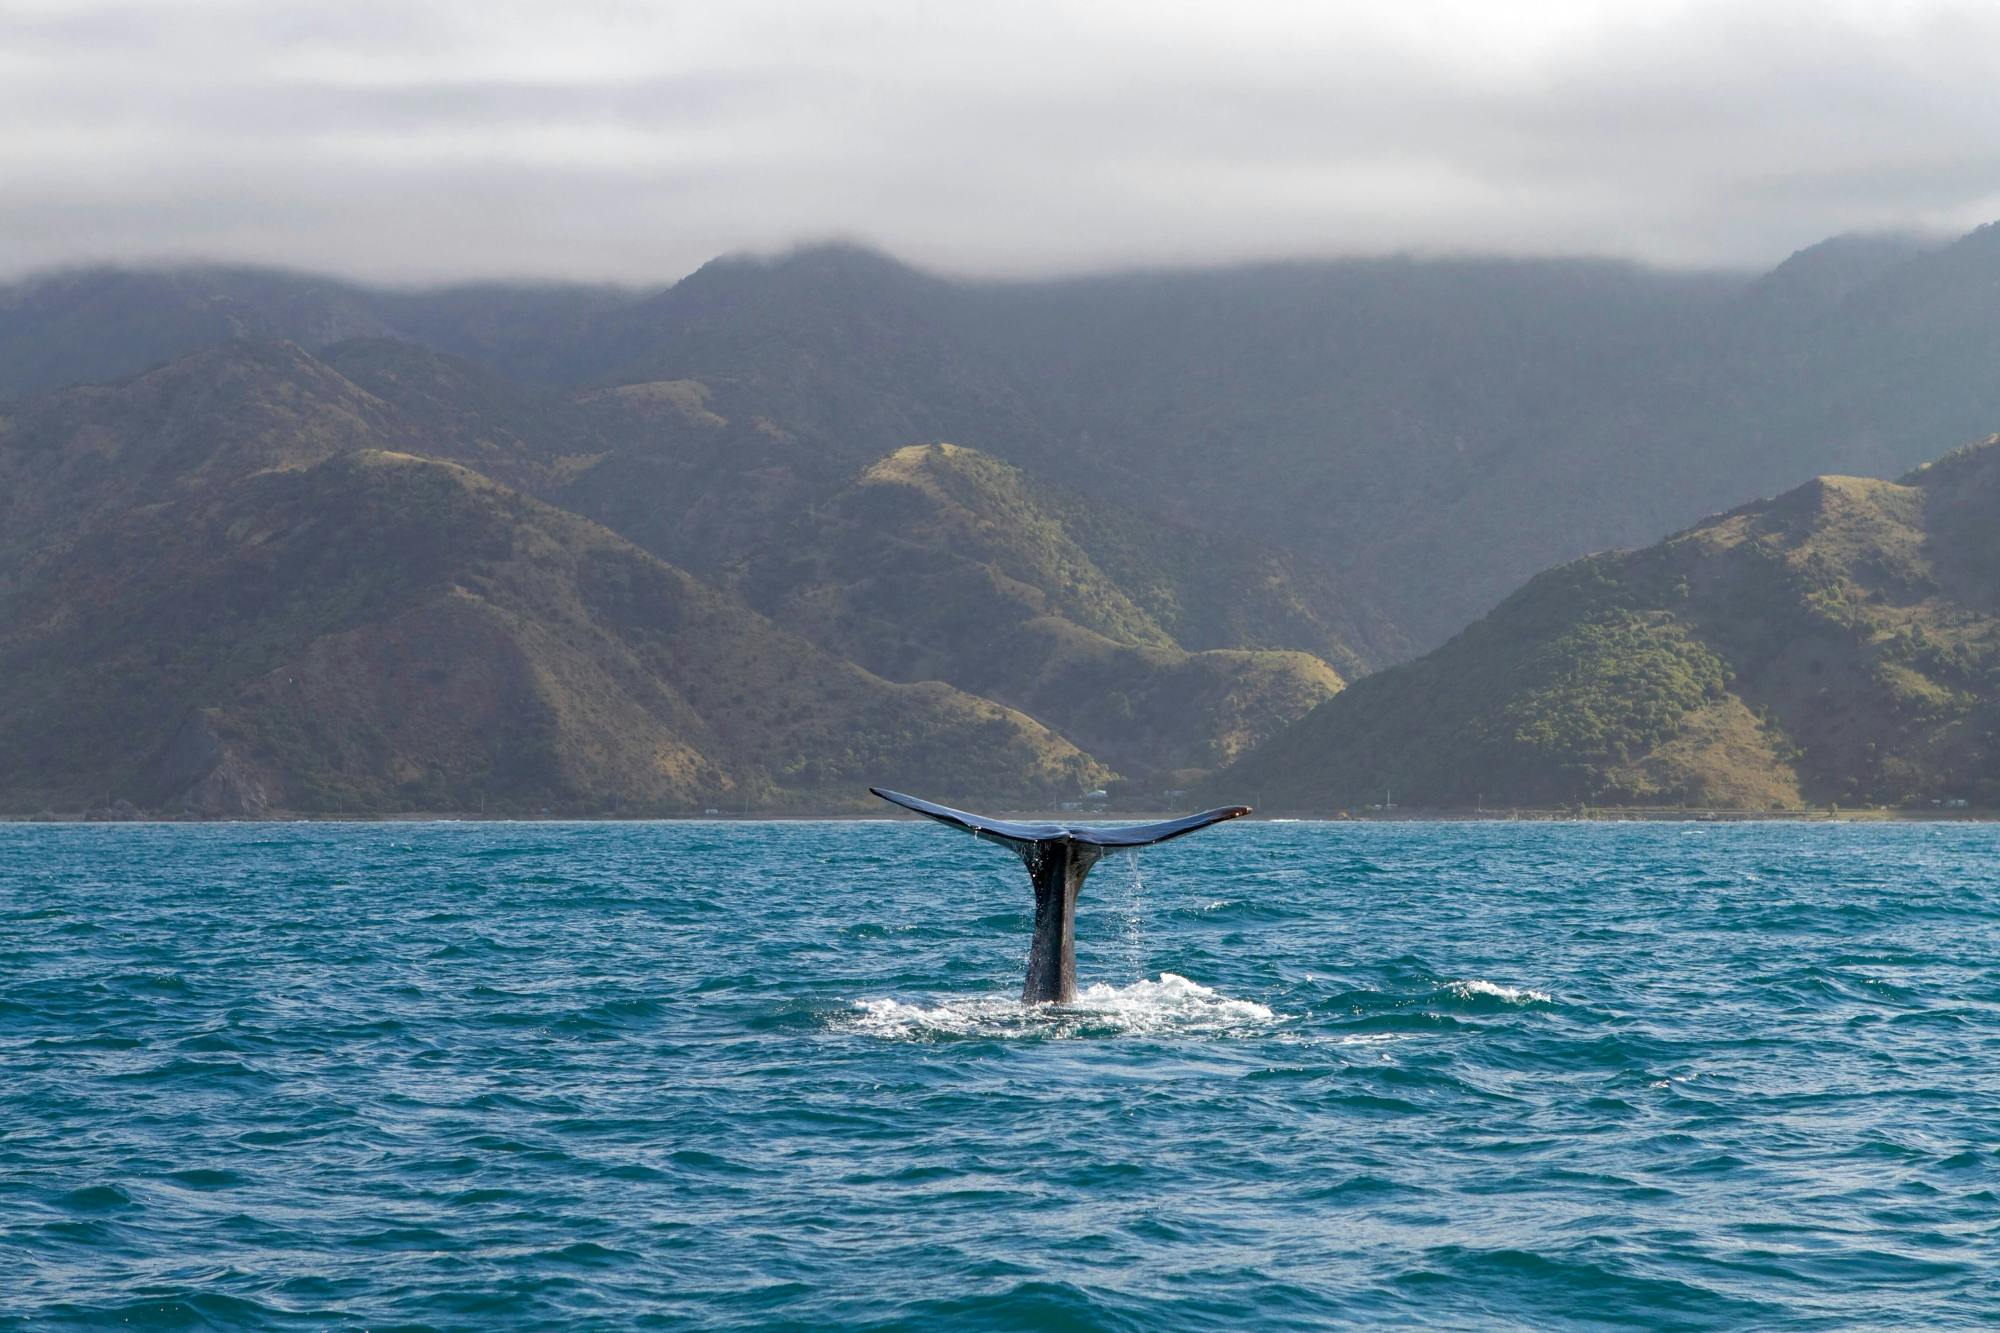 São Miguel Whale Watching Tour